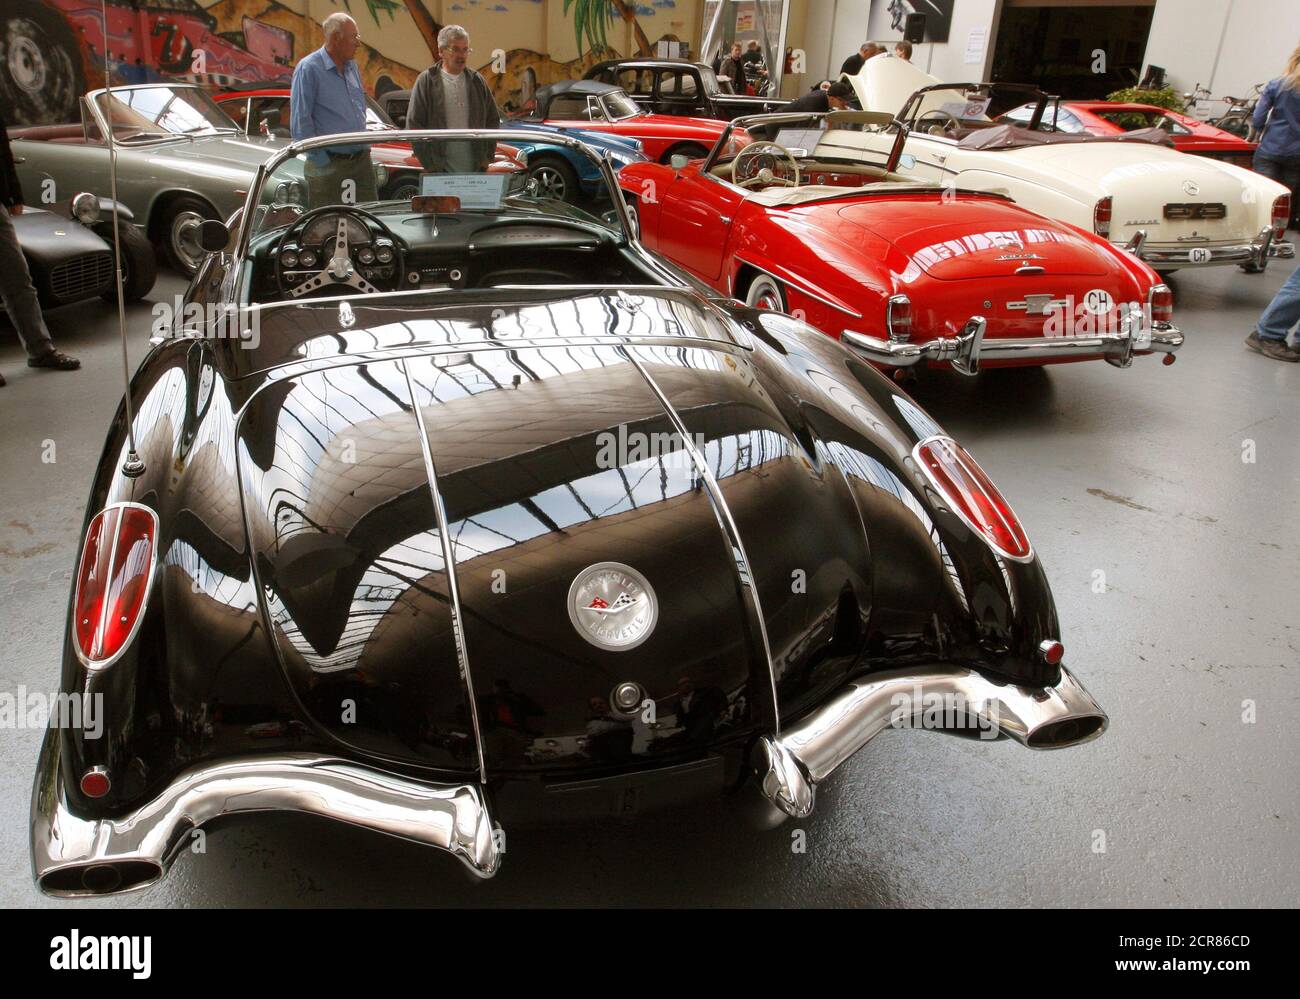 People stand behind a 1958 Chevrolet Corvette convertible (front LtoR), a  1962 Mercedes 190 SL roadster car and a 1960 Mercedes 220 SE cabriolet car  during an auction at the Oldtimer Galerie